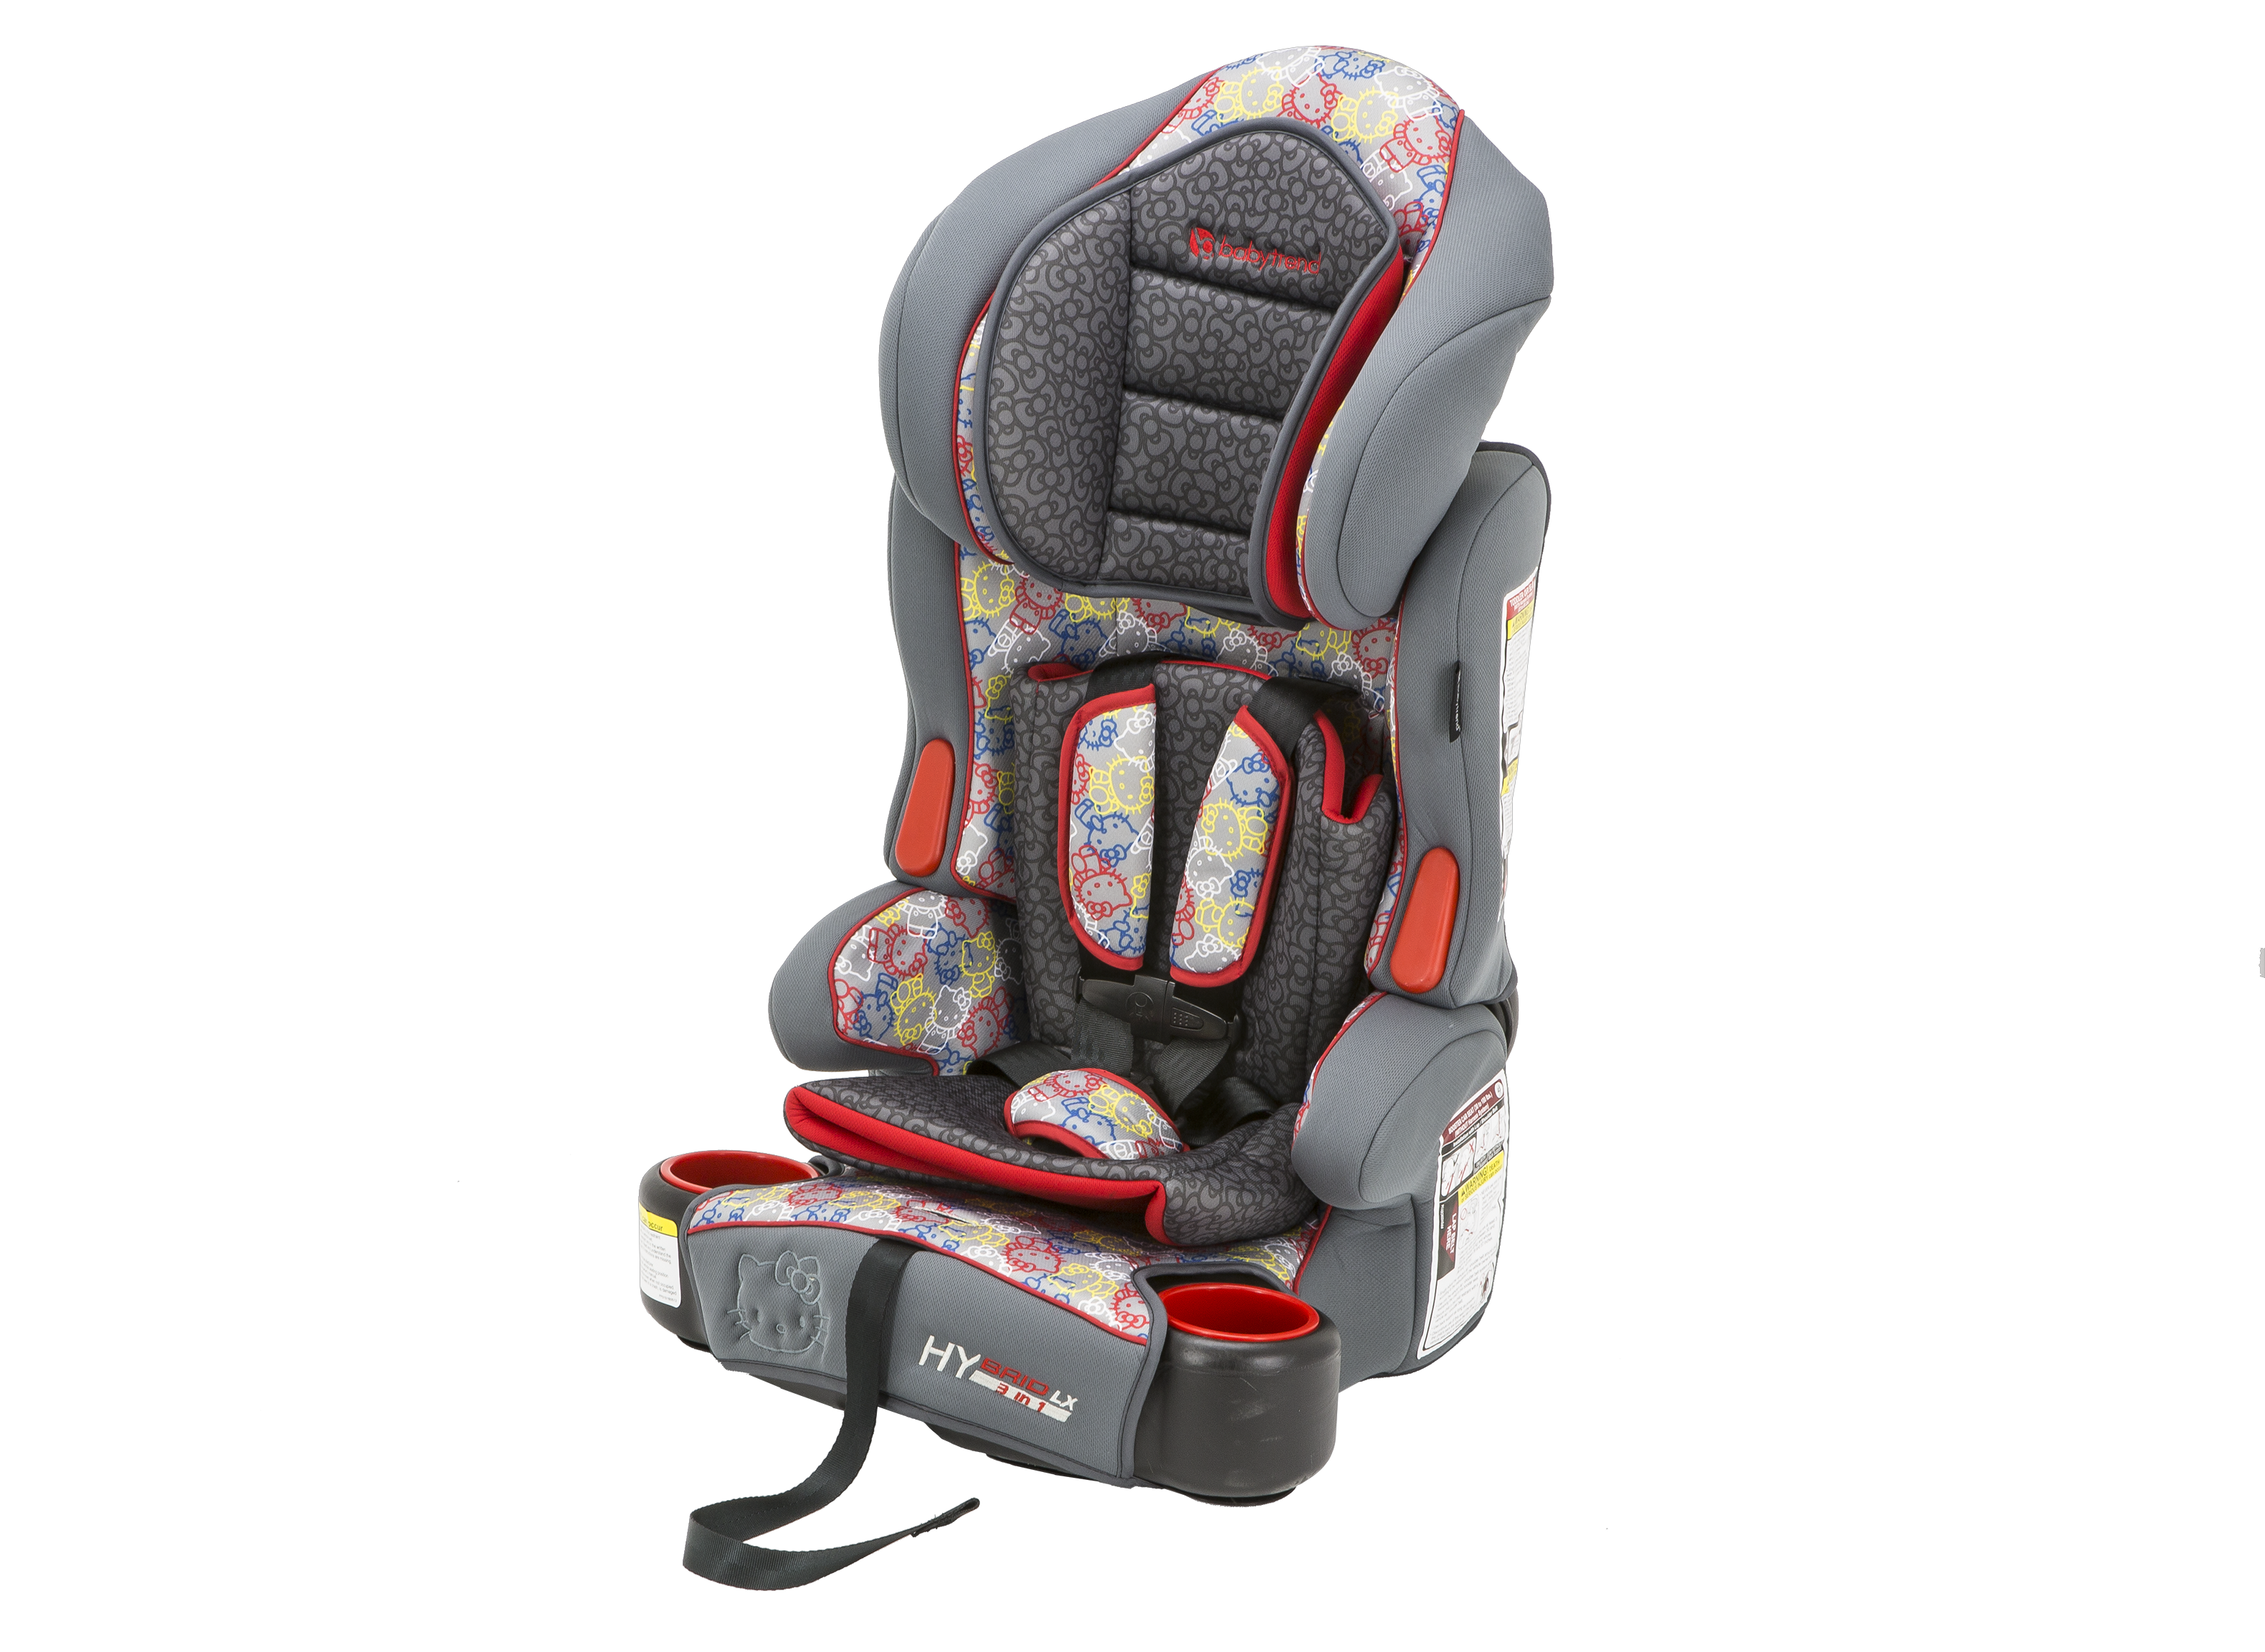 Baby Trend Hybrid 3 In 1 Car Seat Consumer Reports - Are Baby Trend Car Seats Safe